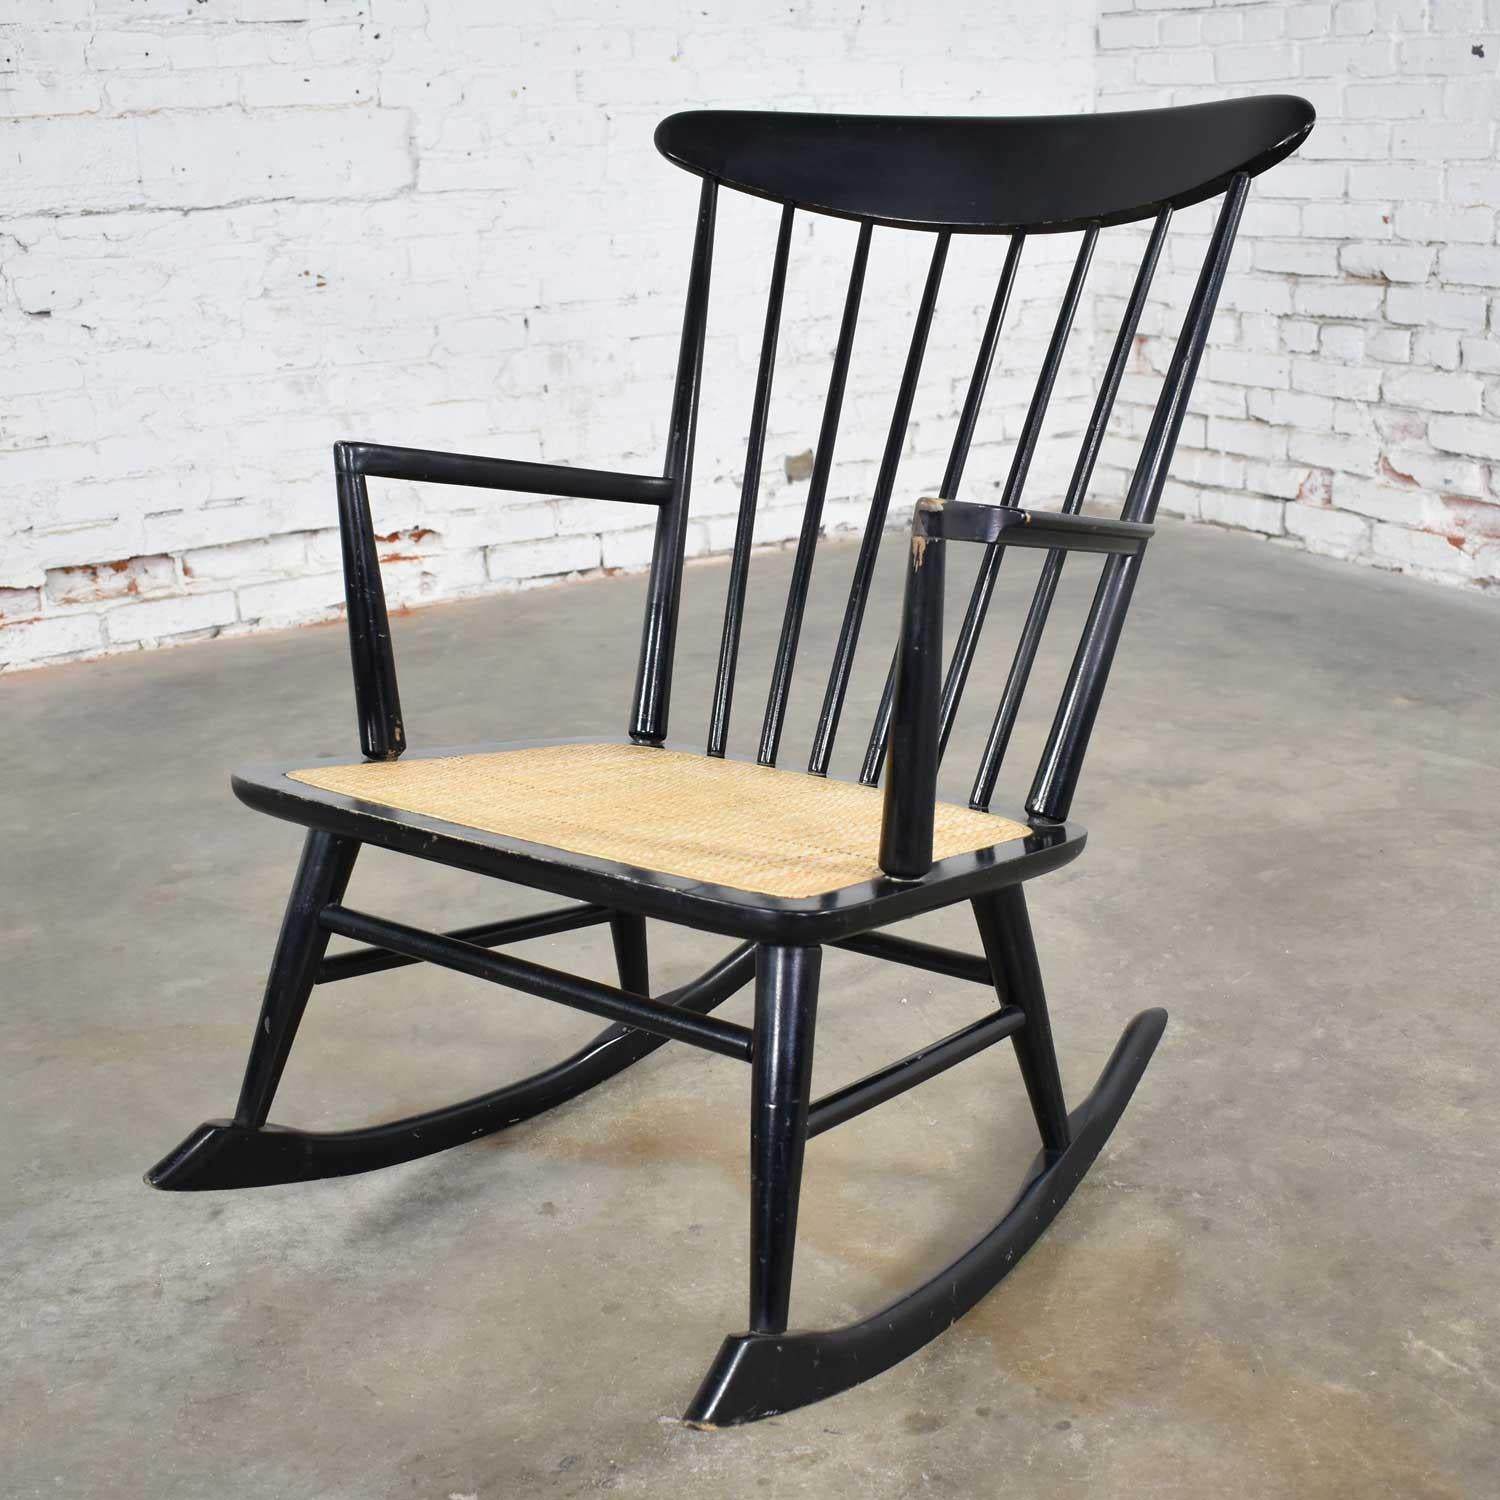 Painted Midcentury Scandinavian Modern Style Spindle Back Rocking Chair Black with Cane